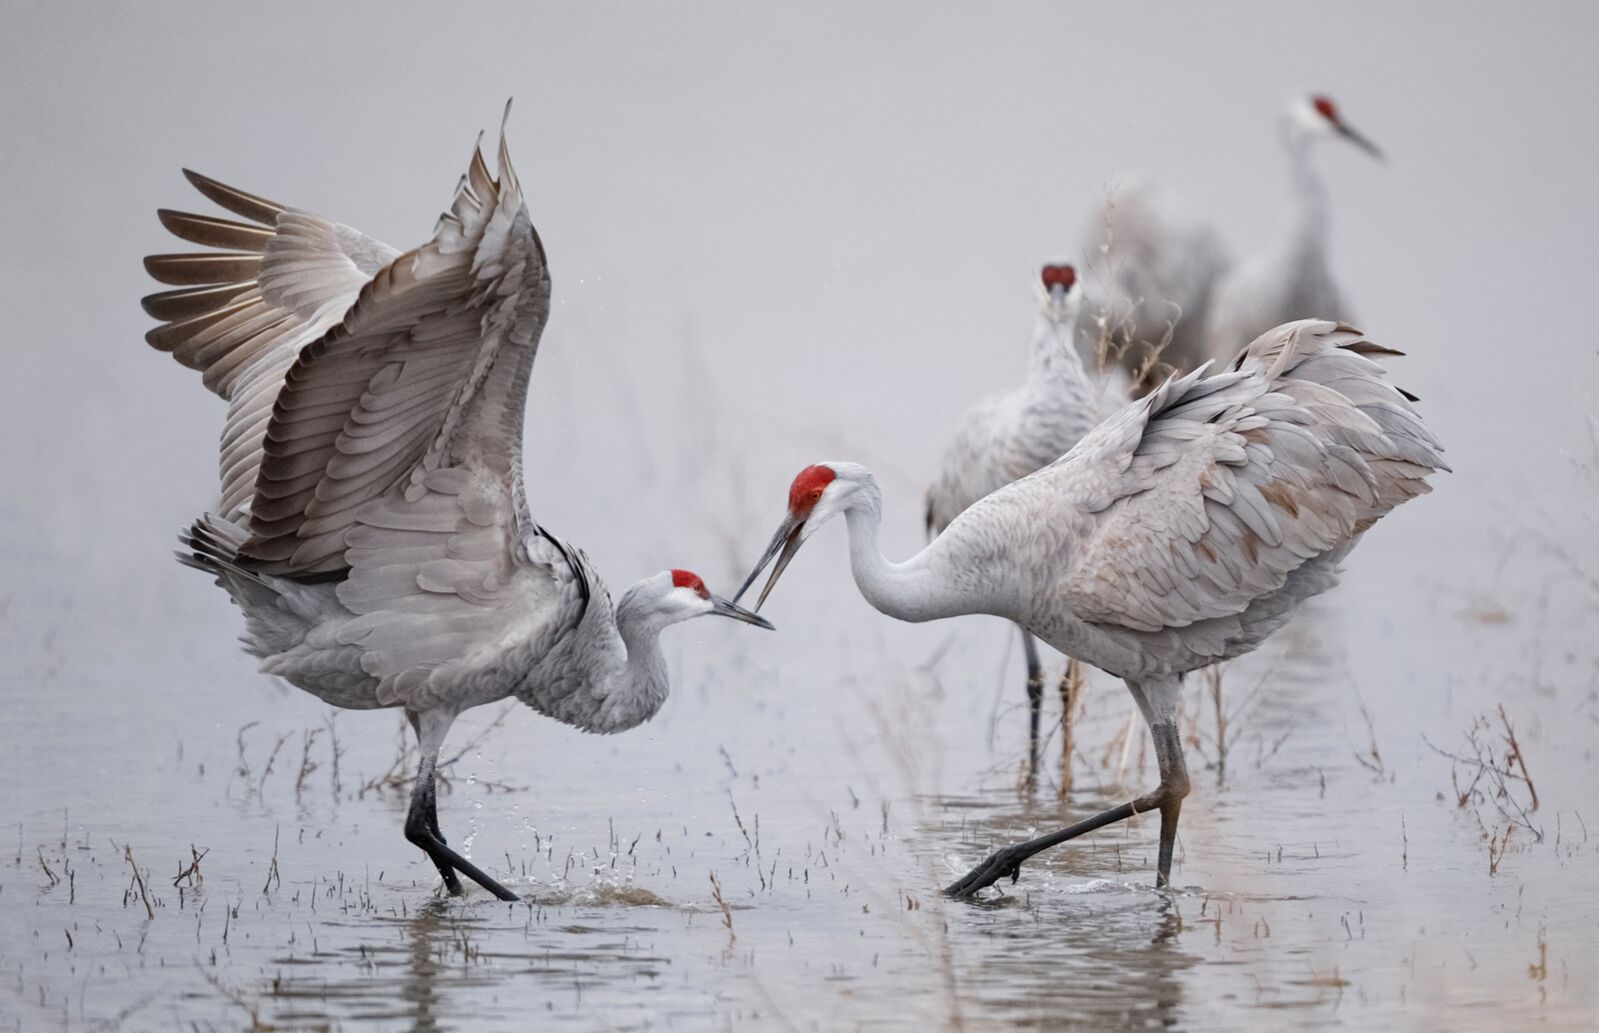 sandhill cranes dancing and trying to mate